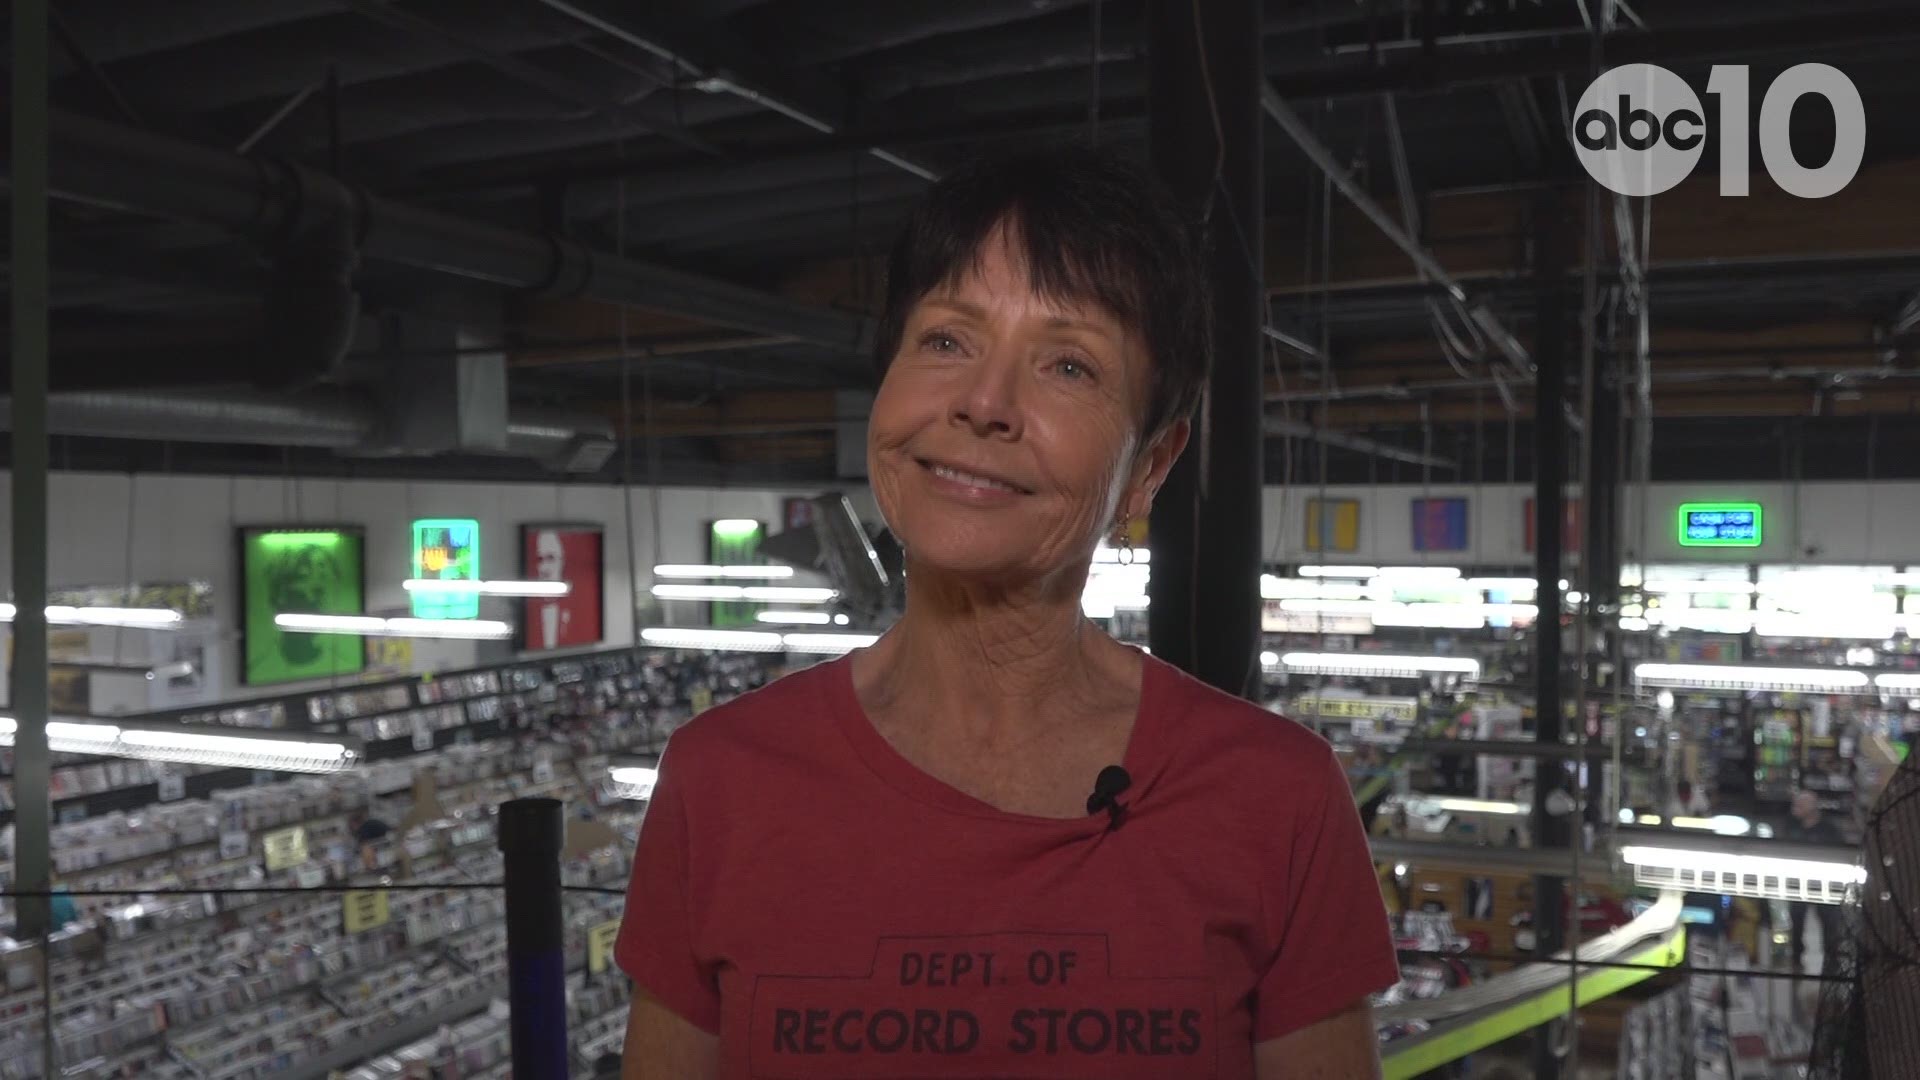 "My husband has been doing it for 45 years. He's ready to retire!" Dilyn Radakovitz told ABC10 Wednesday. 

Much to the shock of locals, the family announced this week that they will close all of the Dimple Records stores once they've cleared their inventory. Dilyn said that won't be soon though - they've got three warehouses of merchandise to go through!